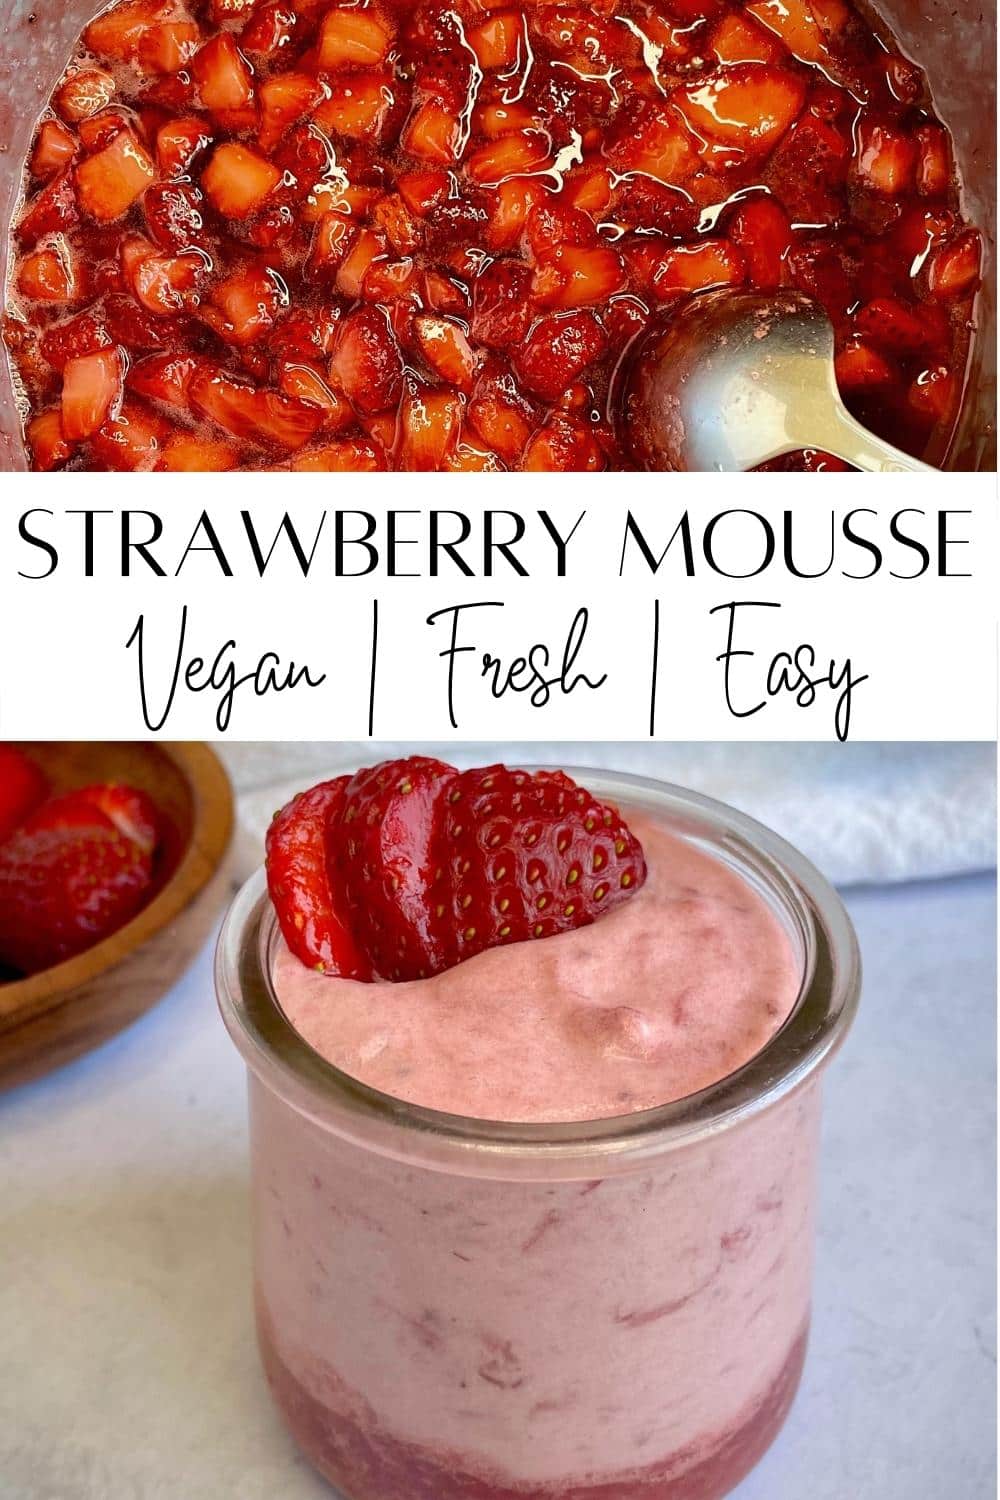 Pinterest pin image of strawberry mousse.